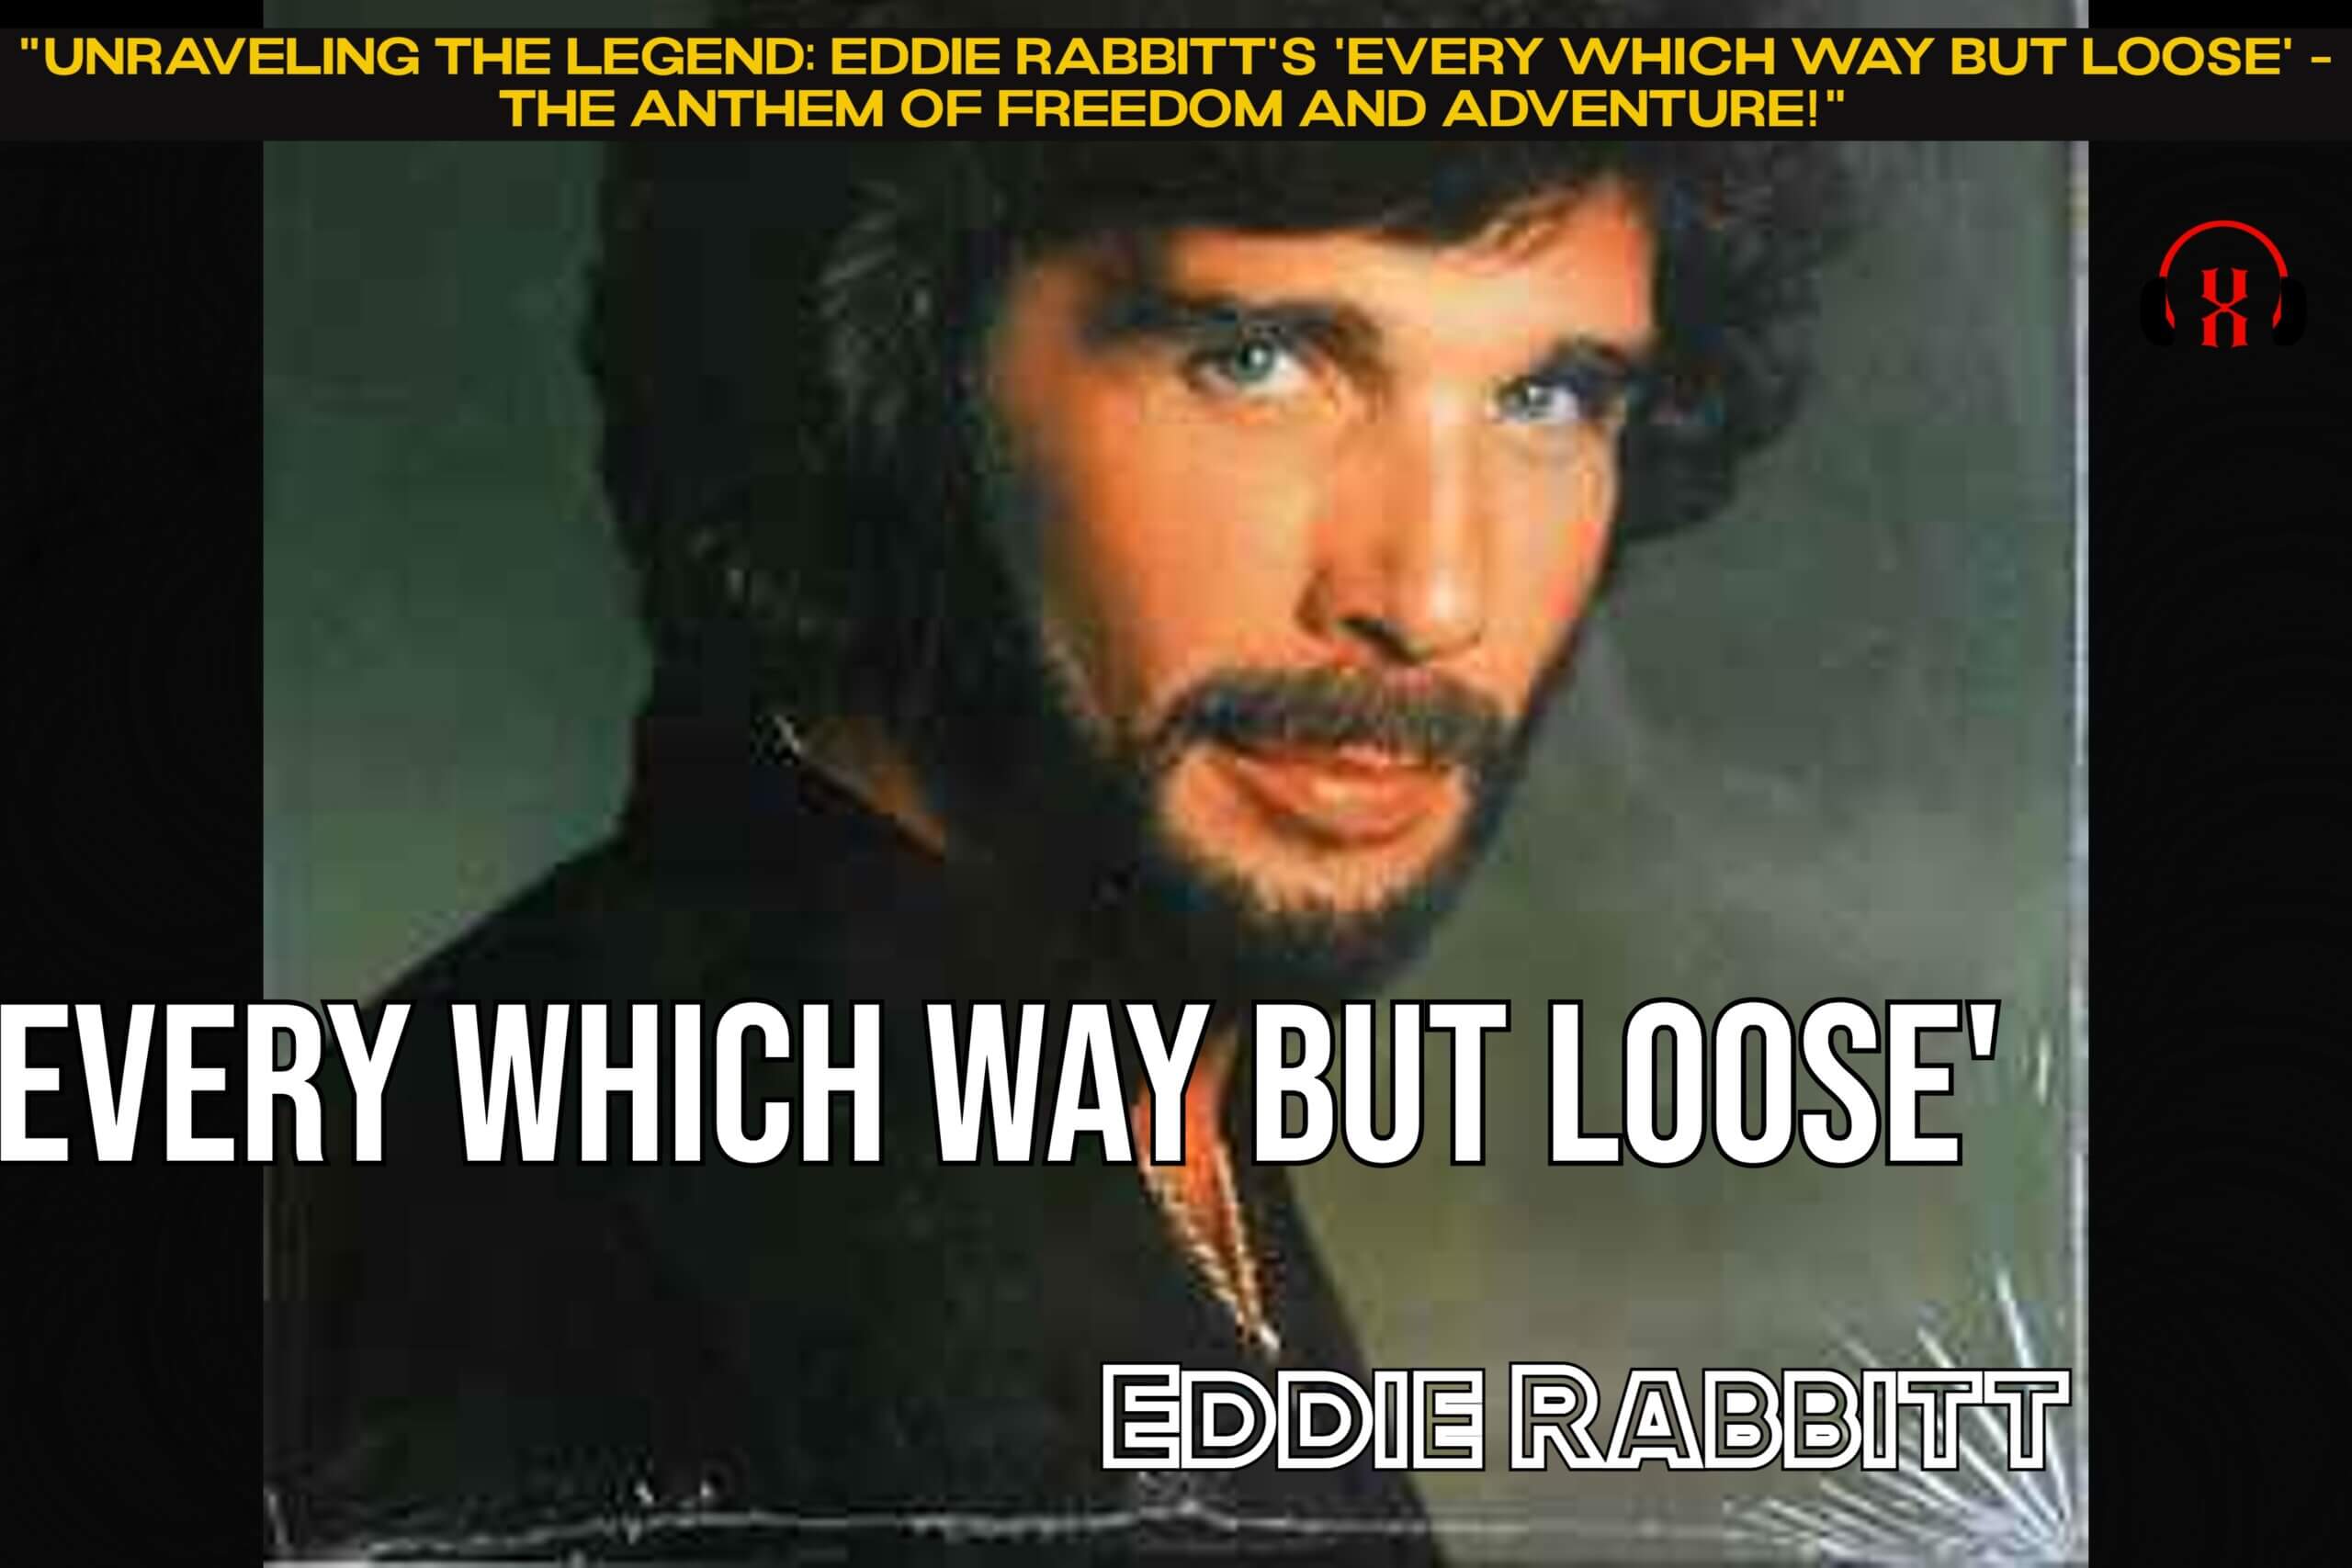 "Unraveling the Legend: Eddie Rabbitt's 'Every Which Way But Loose' - The Anthem of Freedom and Adventure!"